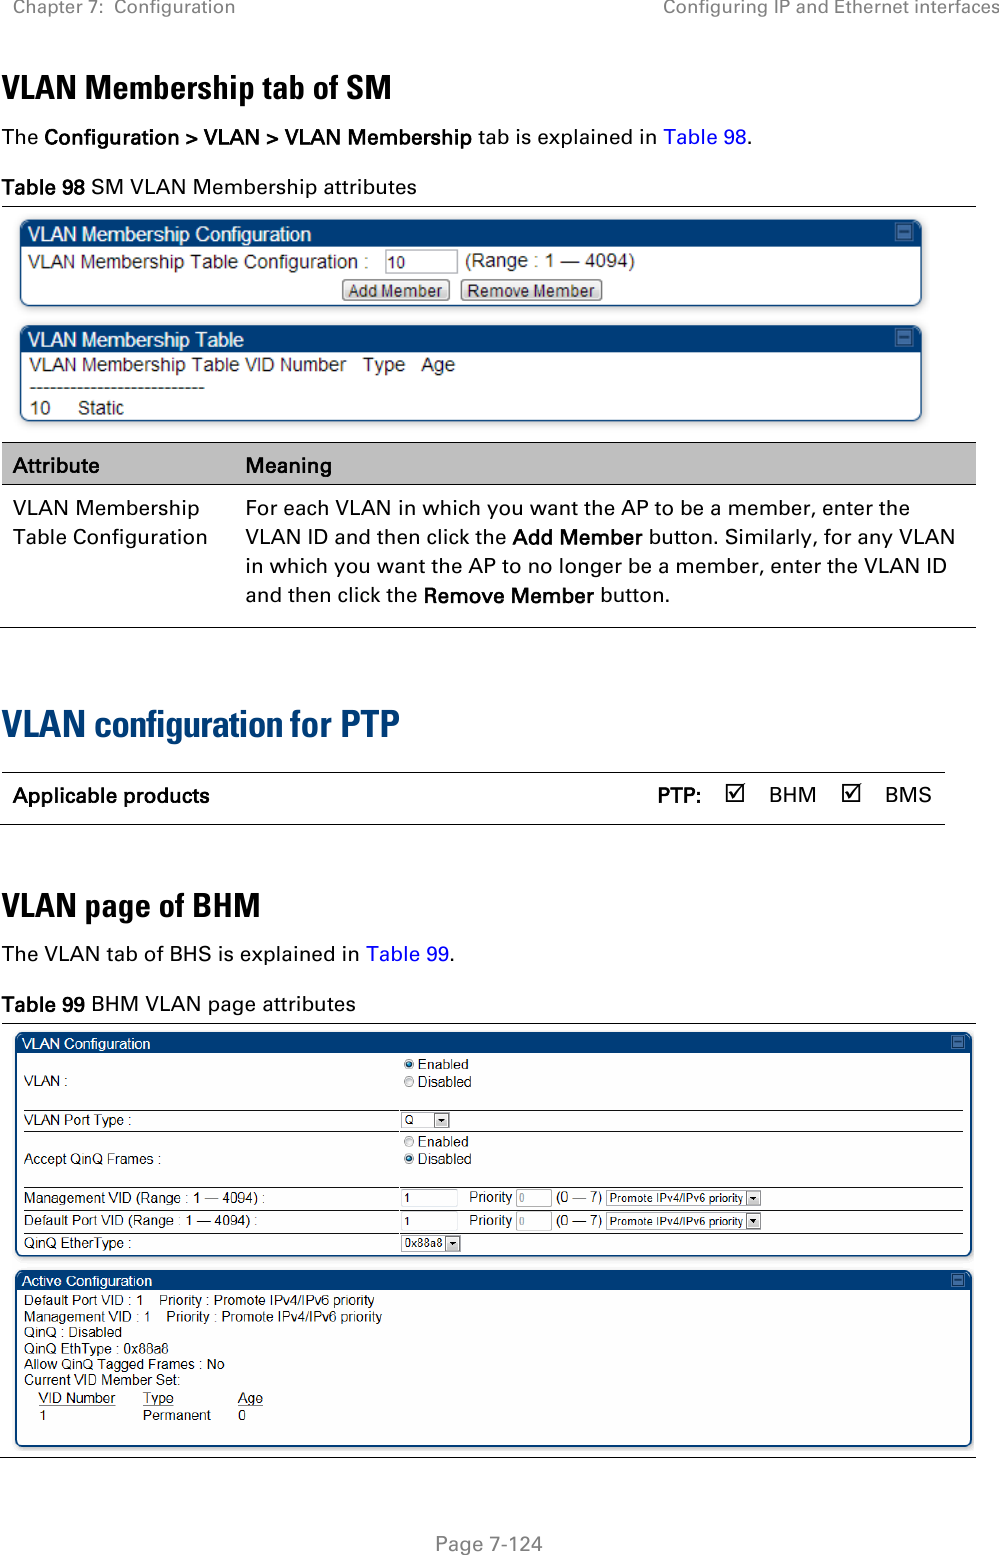 Chapter 7:  Configuration Configuring IP and Ethernet interfaces   Page 7-124 VLAN Membership tab of SM The Configuration &gt; VLAN &gt; VLAN Membership tab is explained in Table 98. Table 98 SM VLAN Membership attributes  Attribute Meaning VLAN Membership Table Configuration For each VLAN in which you want the AP to be a member, enter the VLAN ID and then click the Add Member button. Similarly, for any VLAN in which you want the AP to no longer be a member, enter the VLAN ID and then click the Remove Member button.  VLAN configuration for PTP Applicable products      PTP:  BHM  BMS  VLAN page of BHM The VLAN tab of BHS is explained in Table 99. Table 99 BHM VLAN page attributes  